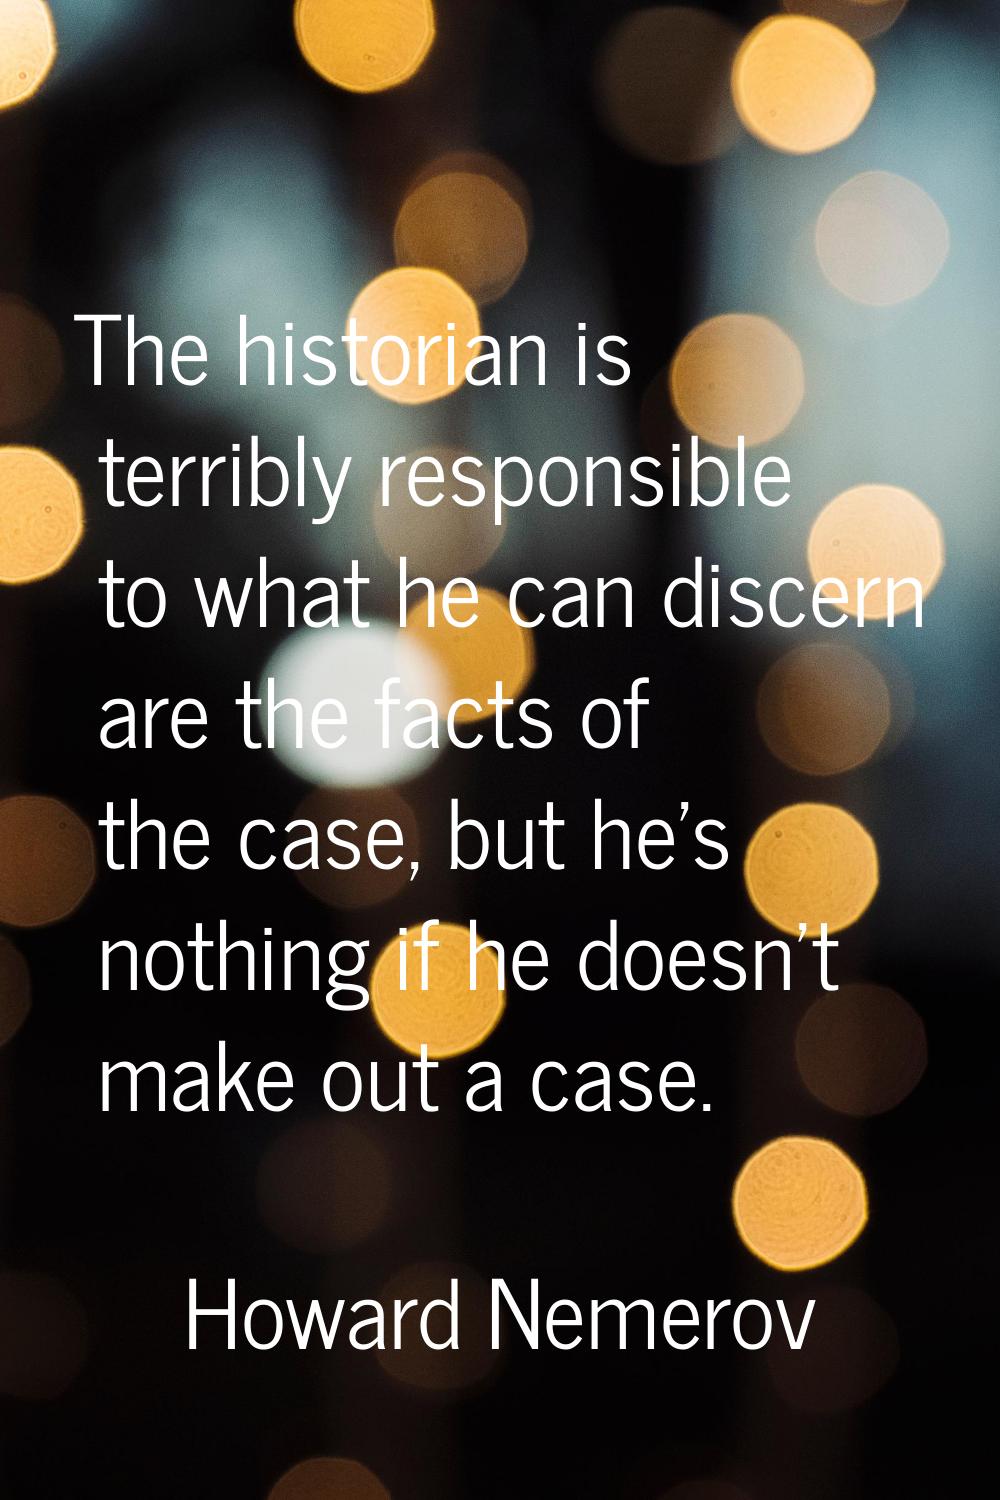 The historian is terribly responsible to what he can discern are the facts of the case, but he's no